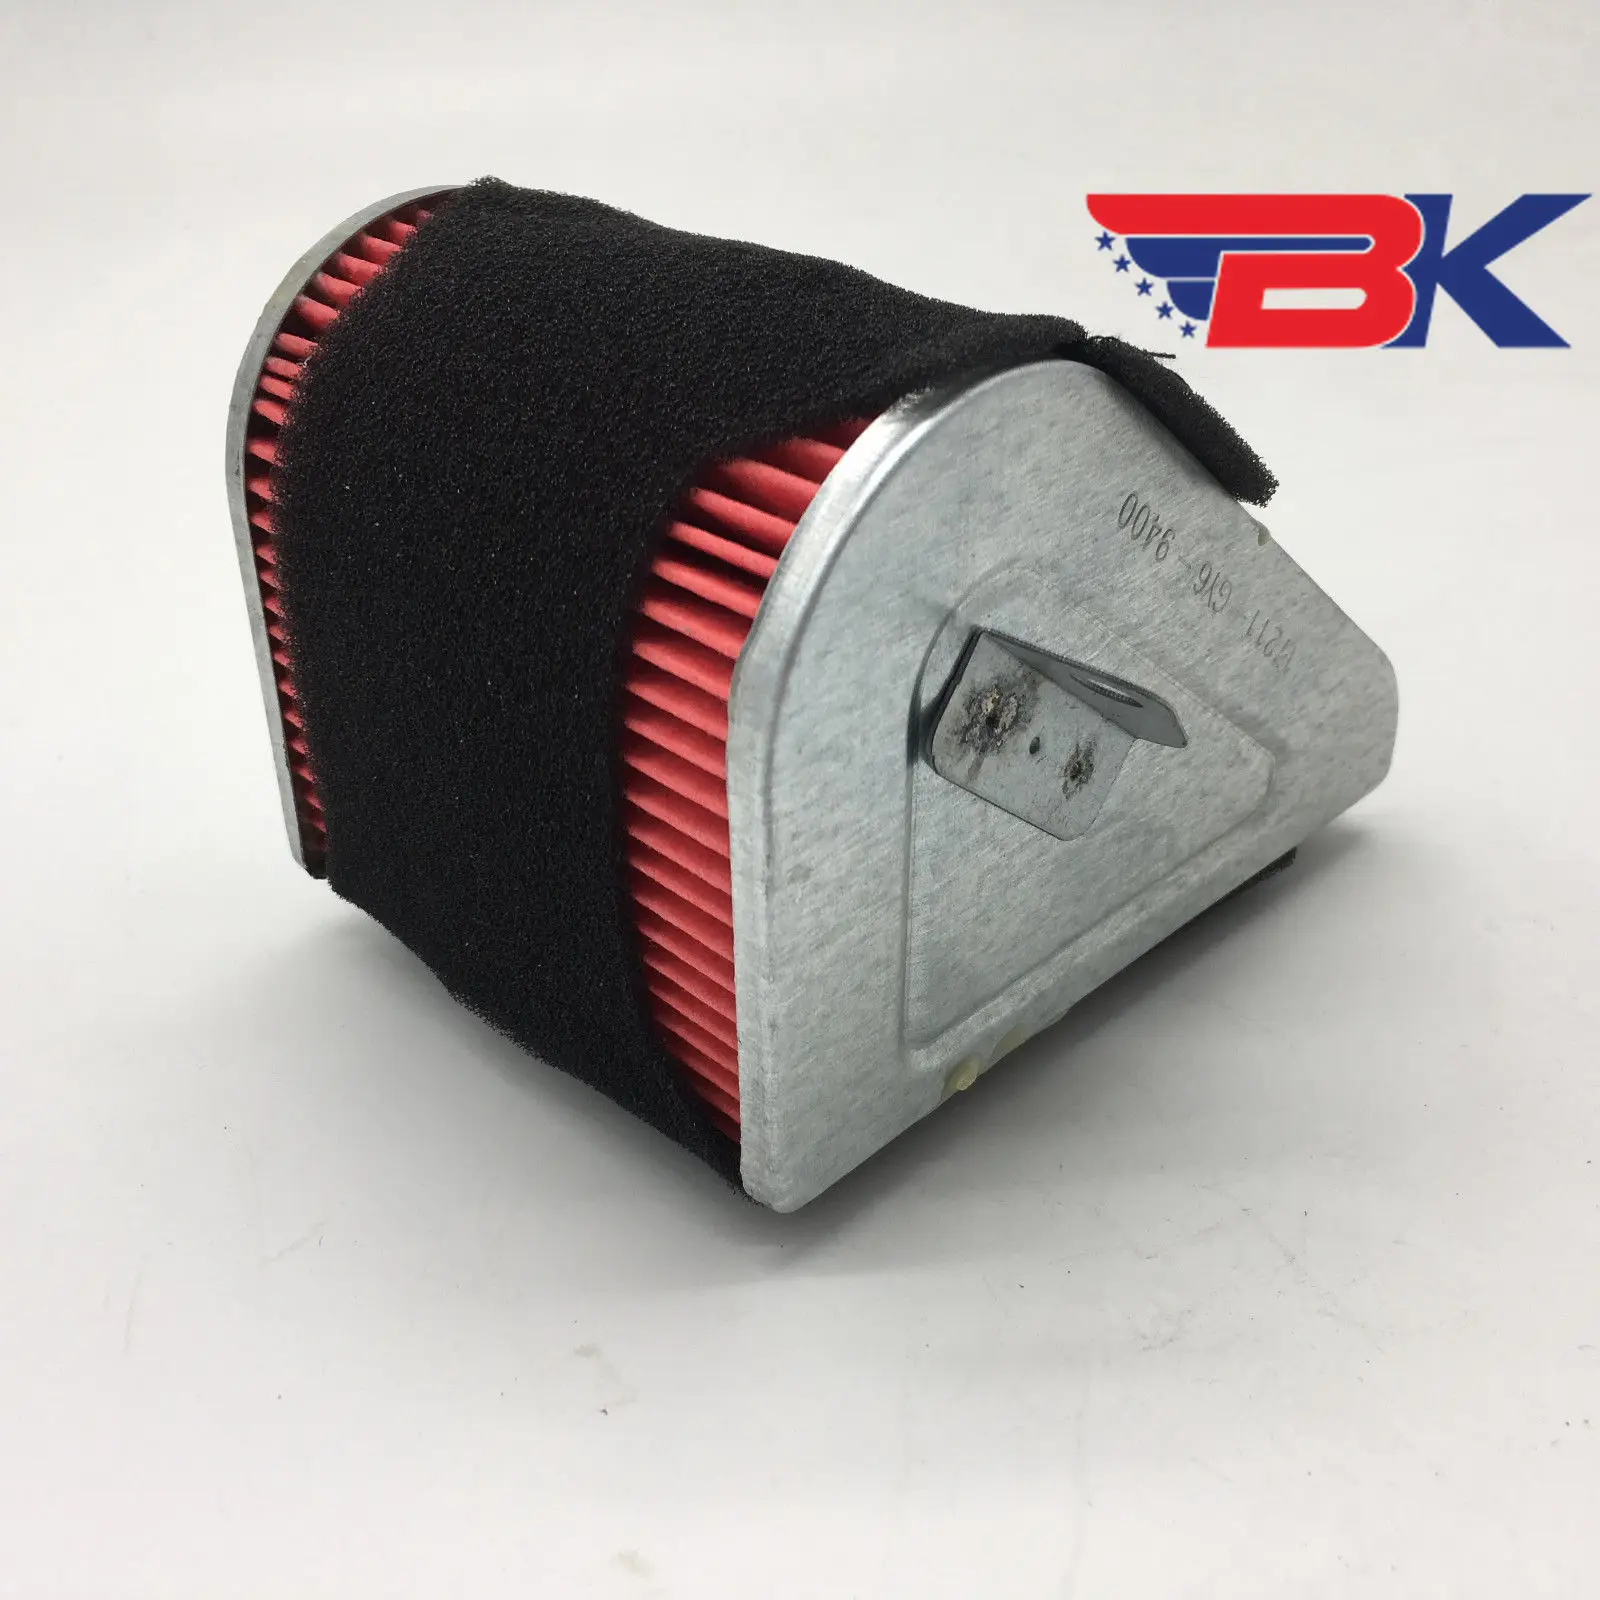 

Air Filter Air Clearner For GY6-125 125cc Scooter Motorcycle 152QMI 157QMJ